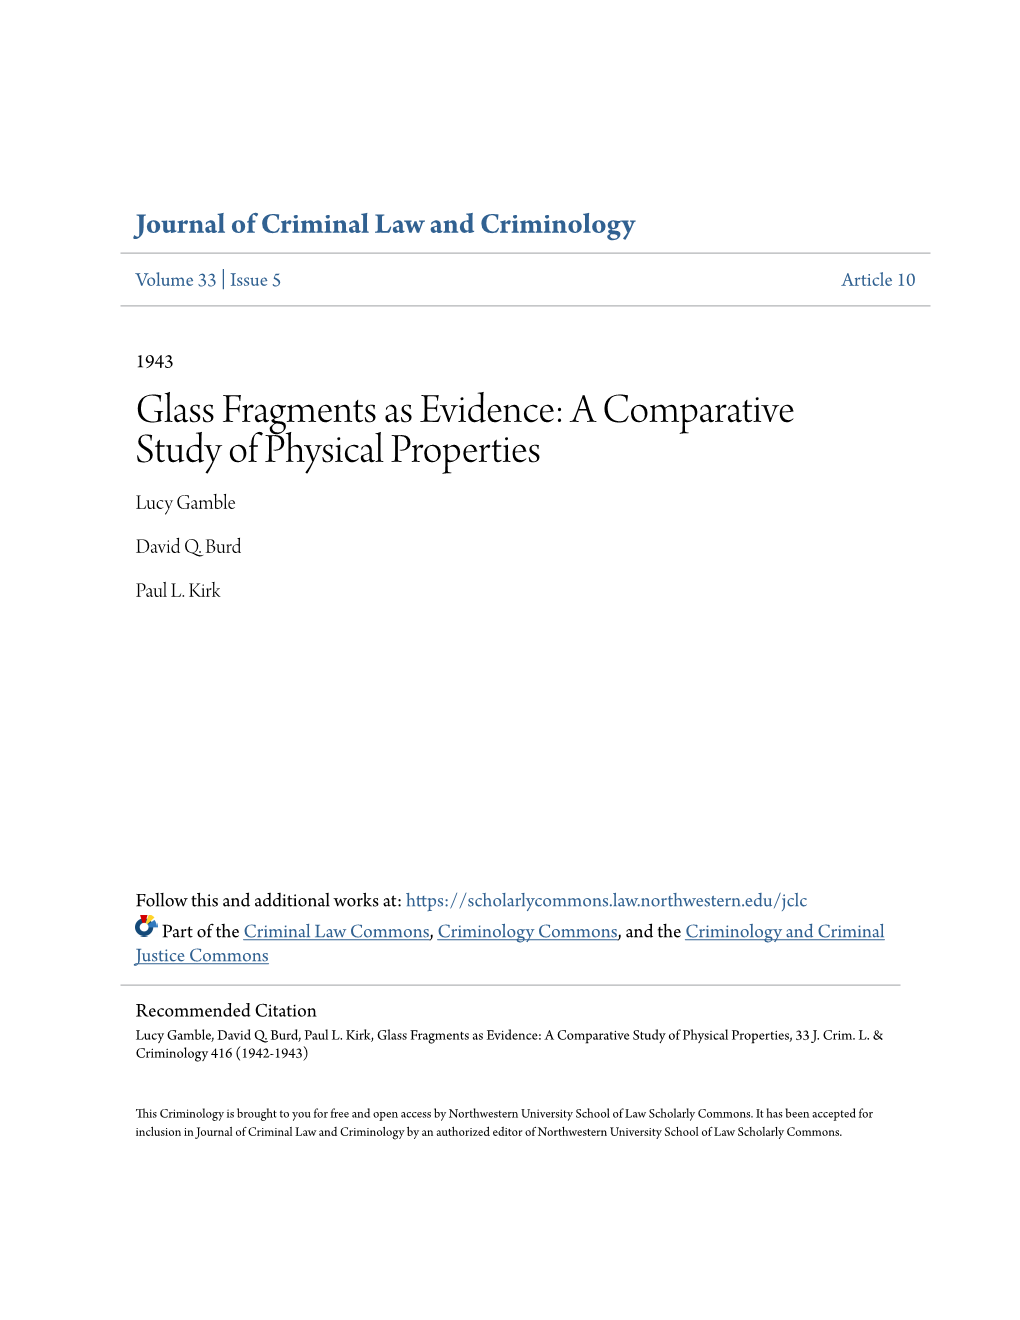 A Comparative Study of Physical Properties Lucy Gamble